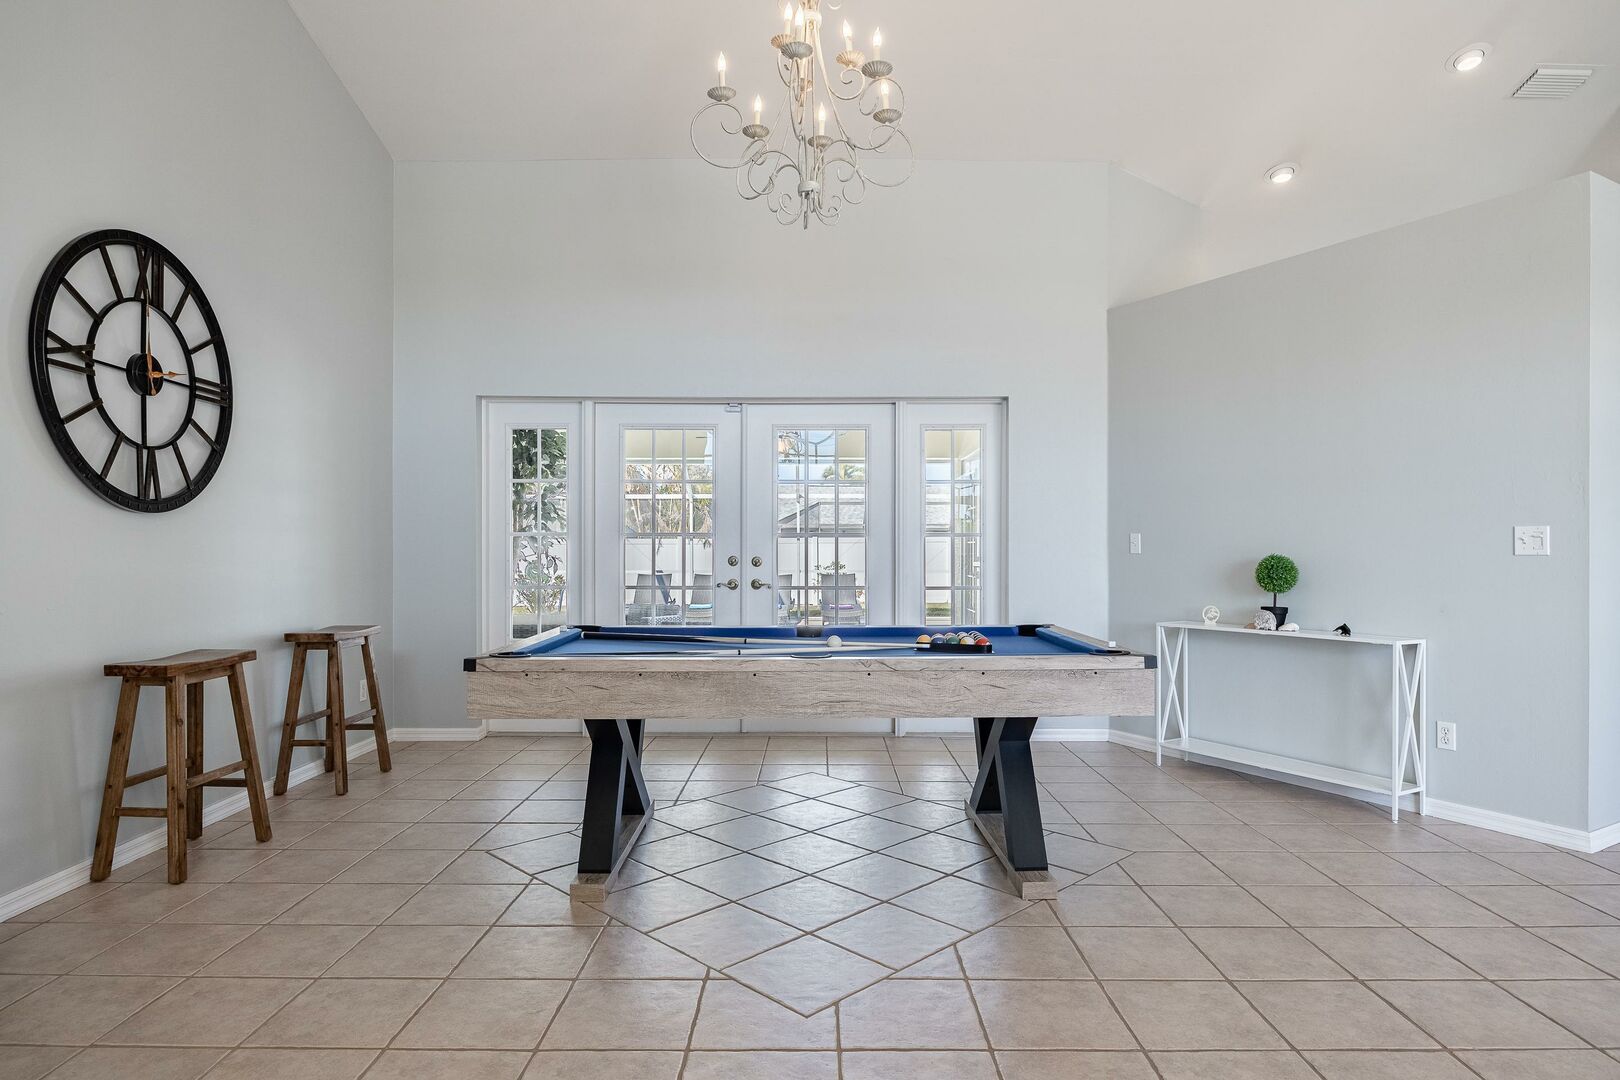 3 bedroom vacation rental with pool table